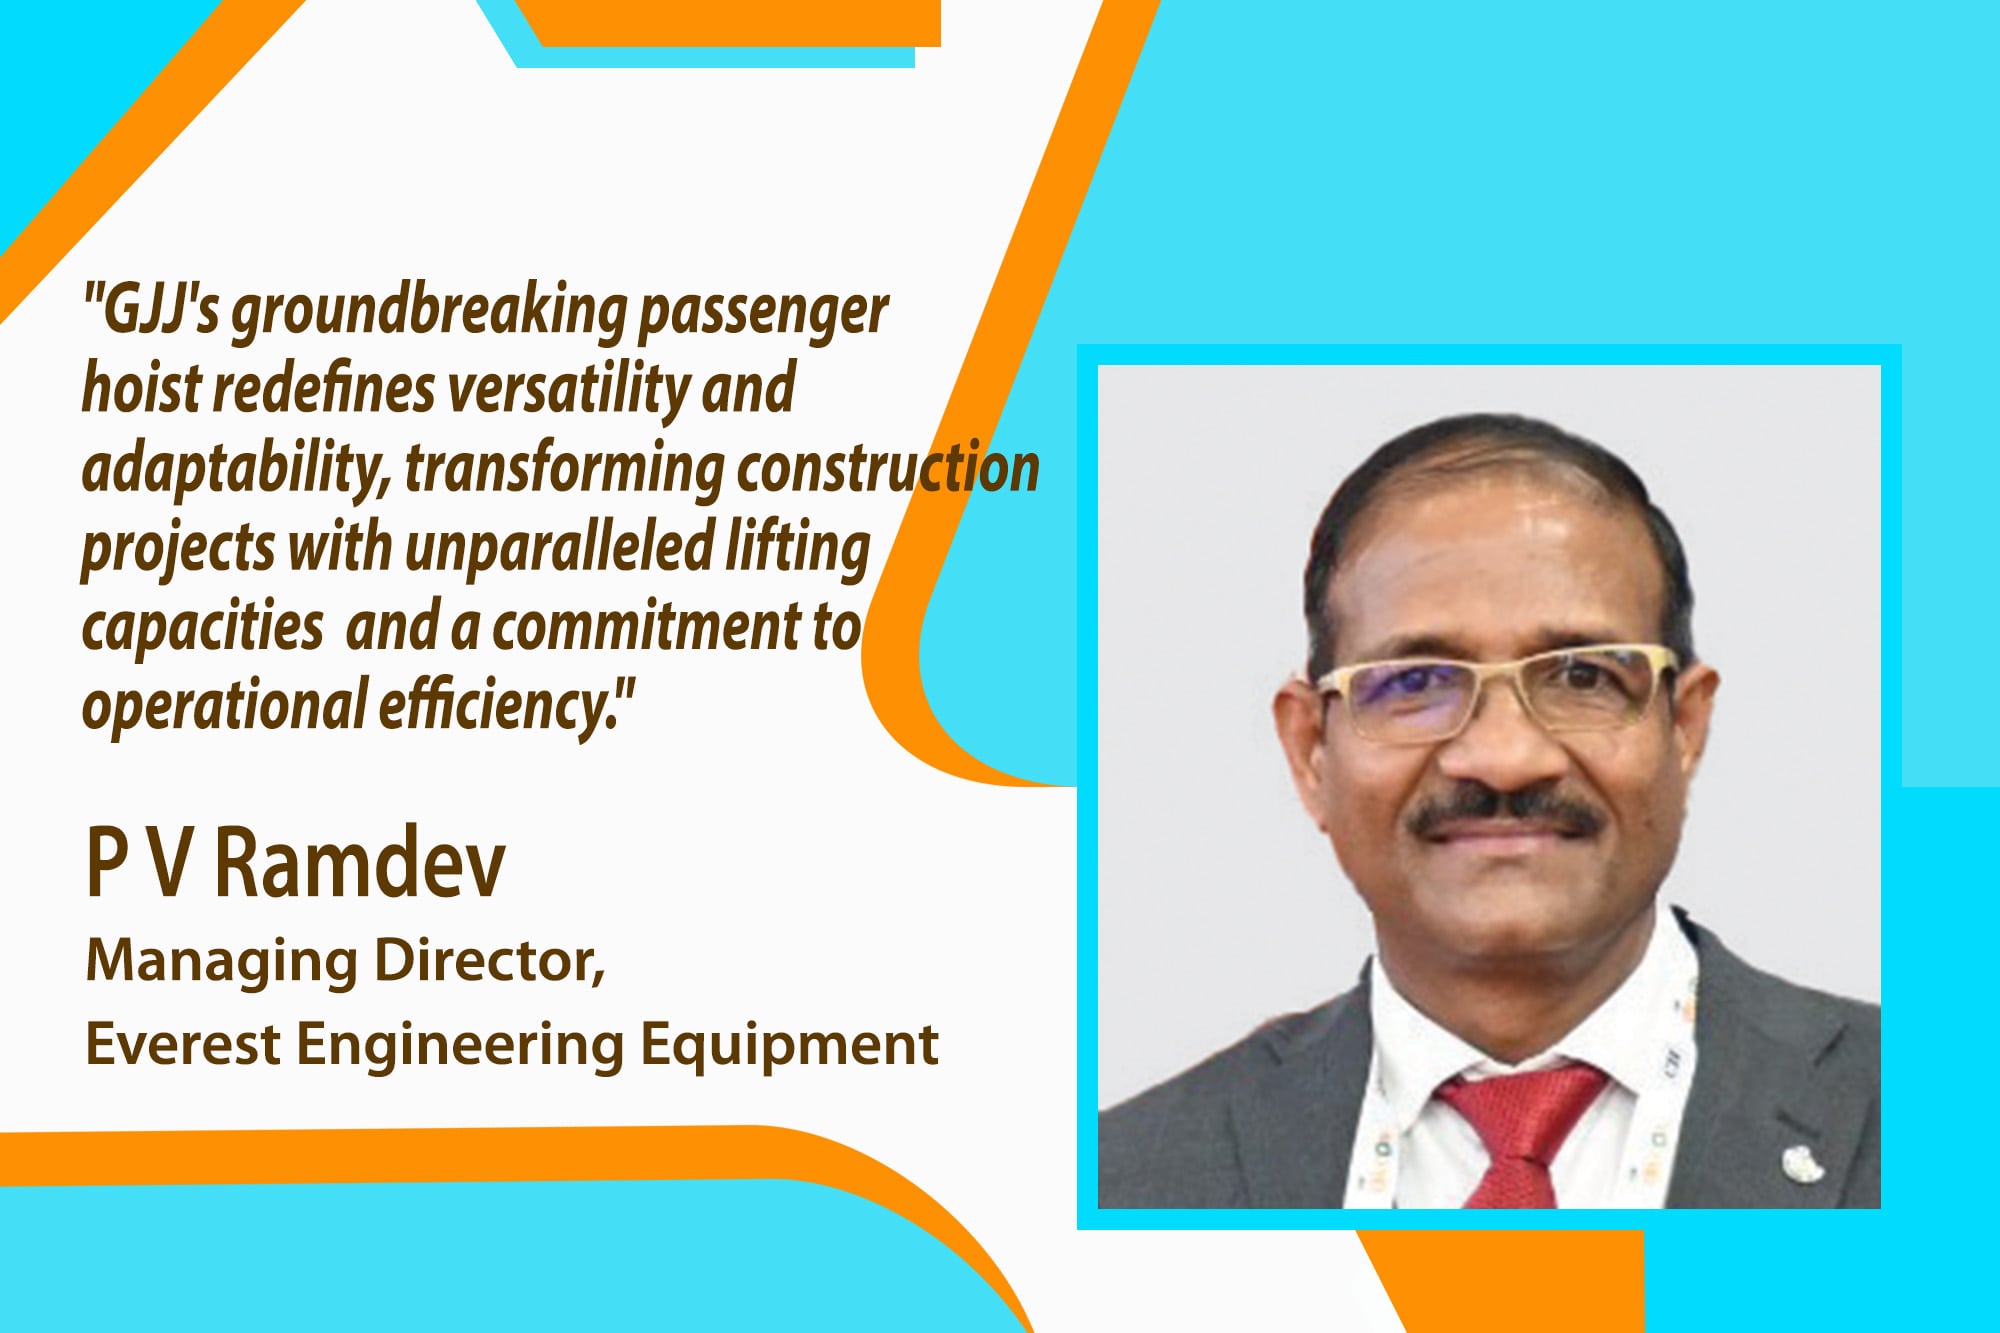 P V Ramdev, the Managing Director, and Shanker Raj, the CEO of Everest Engineering Equipment